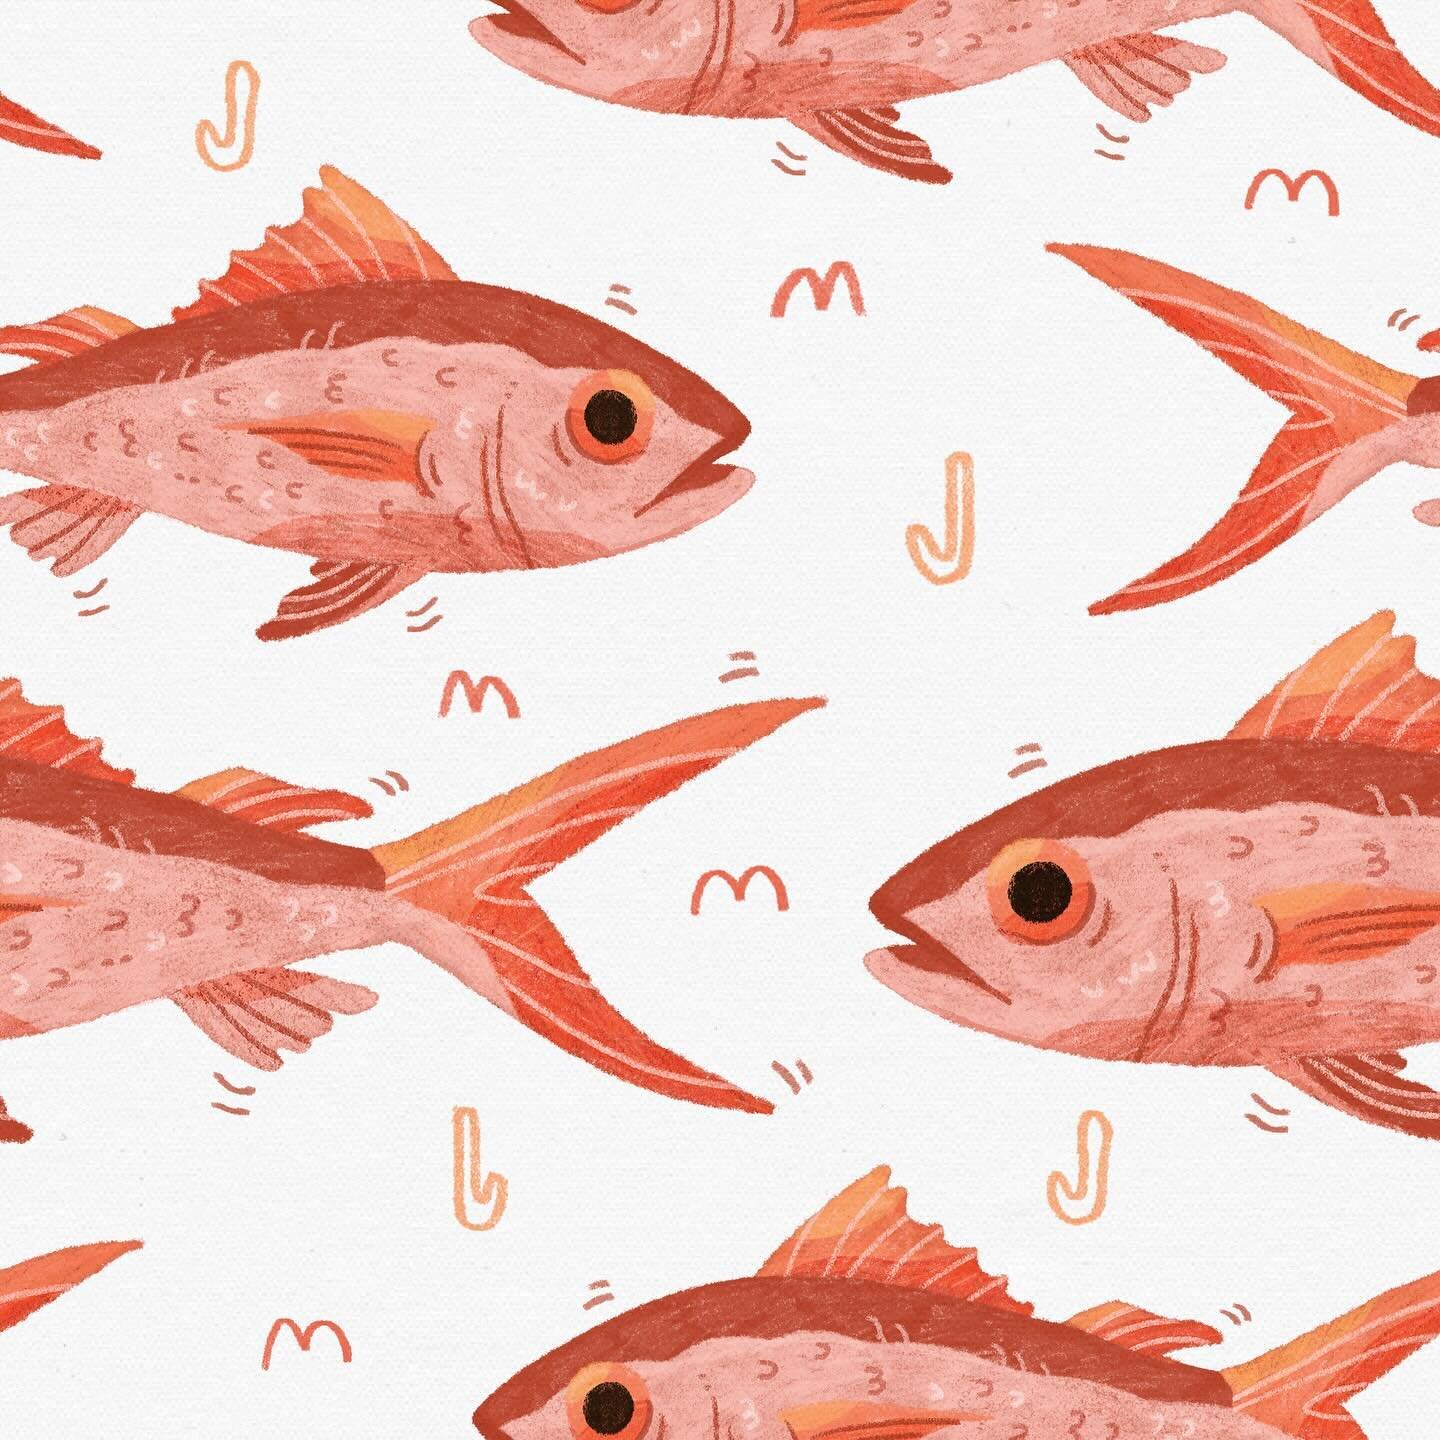 Just finished illustrating this orange fish pattern! 🐠 

I&rsquo;ve put it on a mockup of an apron to visualize how it might look in real life. Let me know what you think! 

Also, if there&rsquo;s a fish expert in here I would appreciate help identi